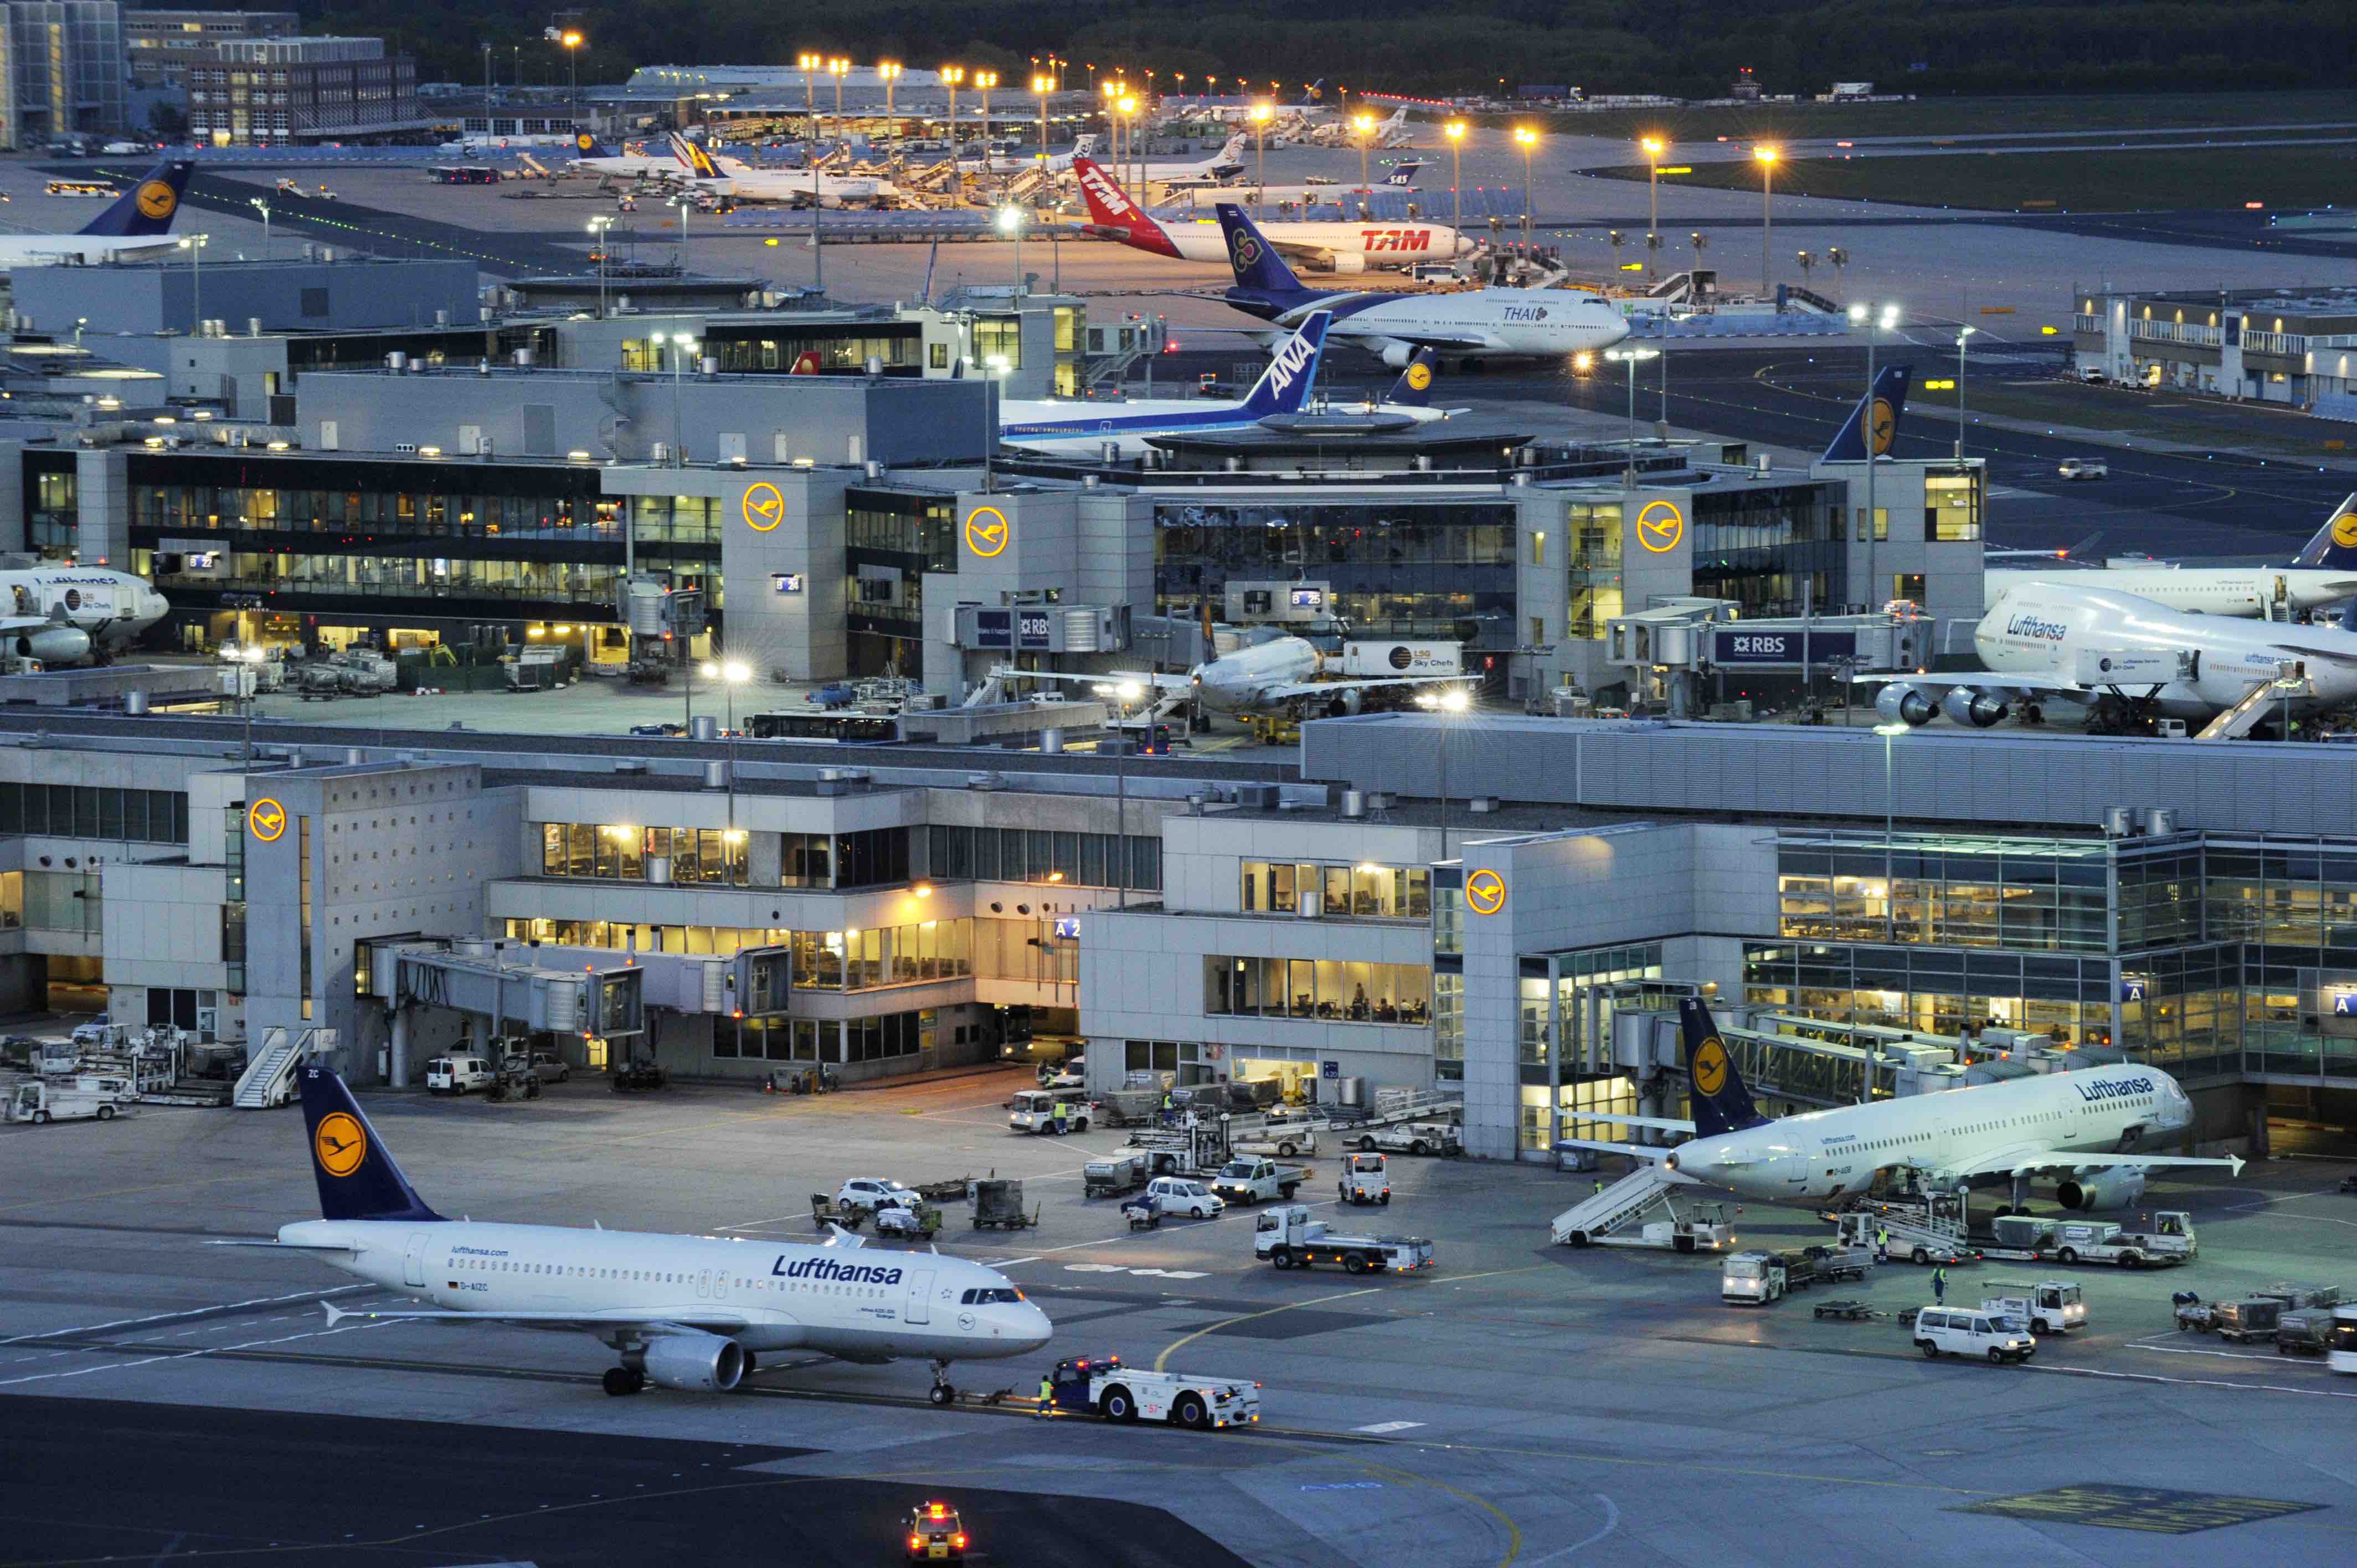 20201015-image-dpa-morning briefing-Fraport